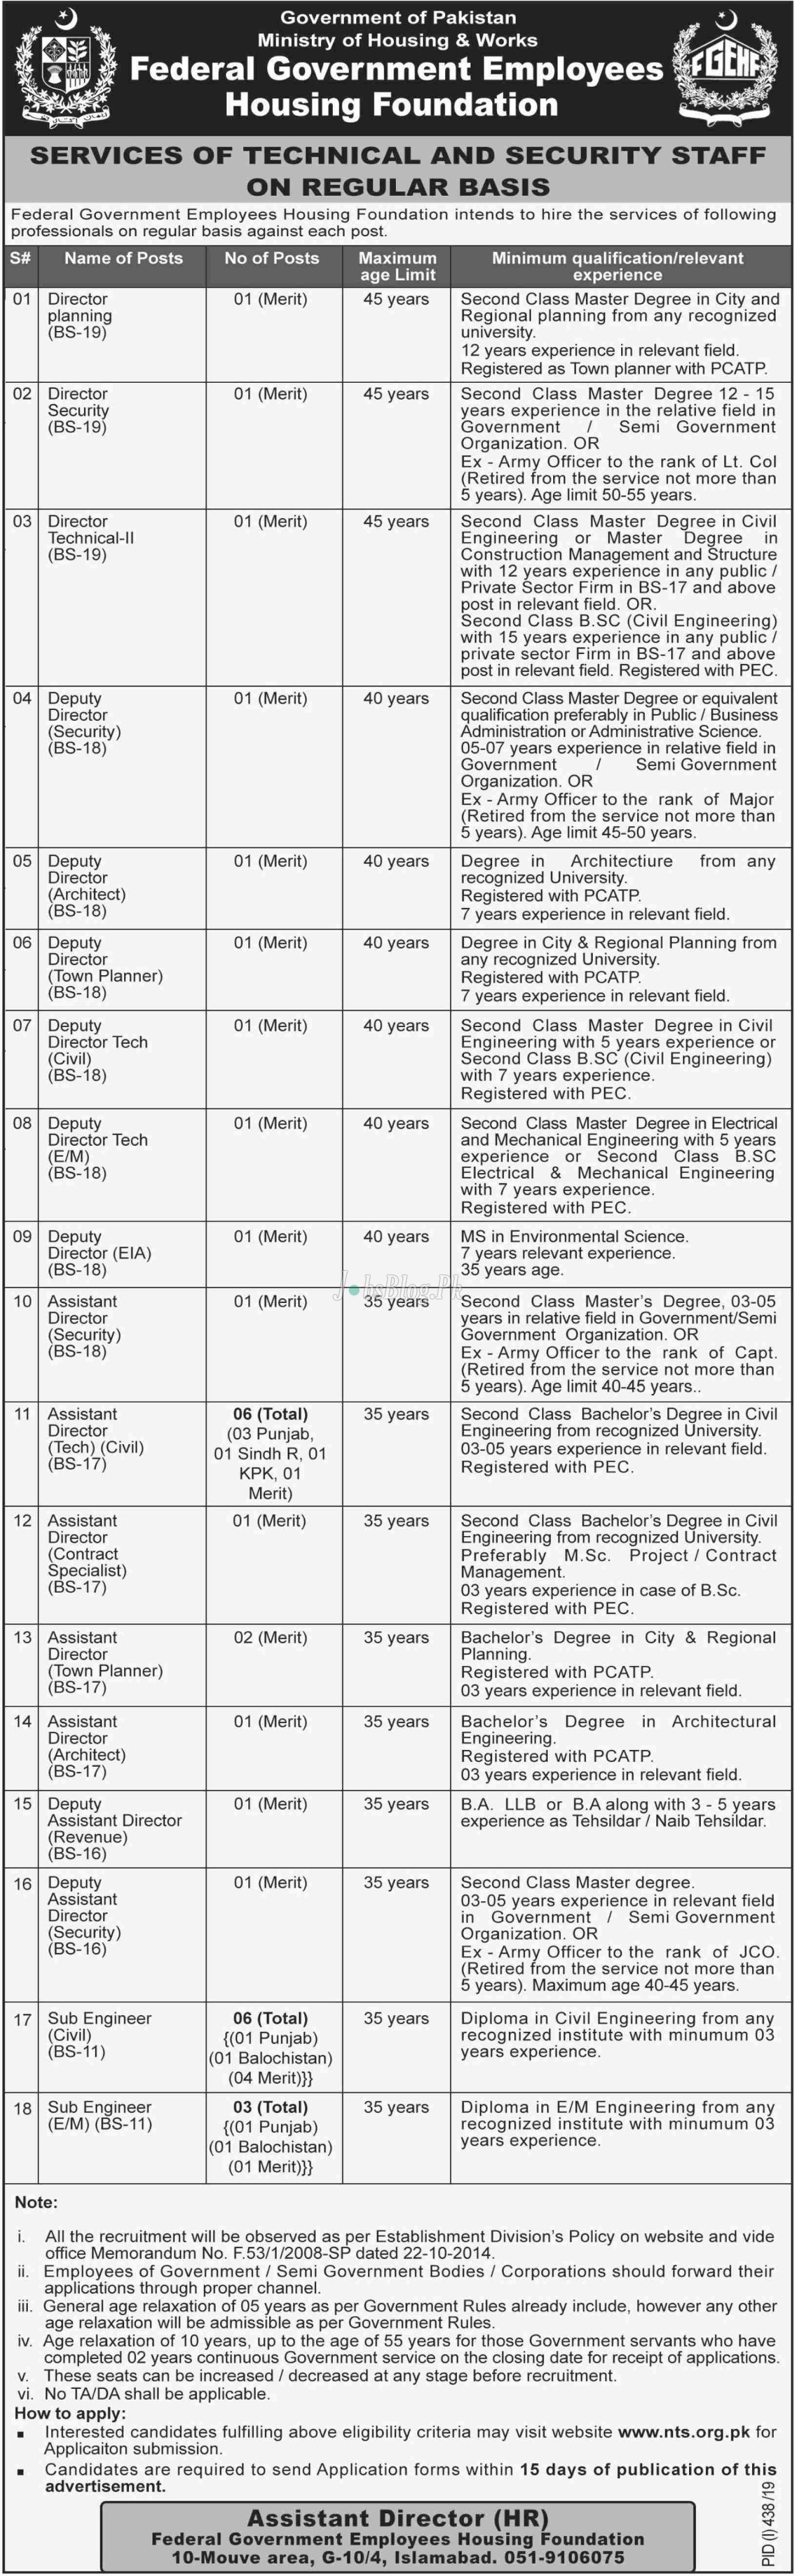 Federal Govt Employees Housing Foundation Islamabad Jobs 2019